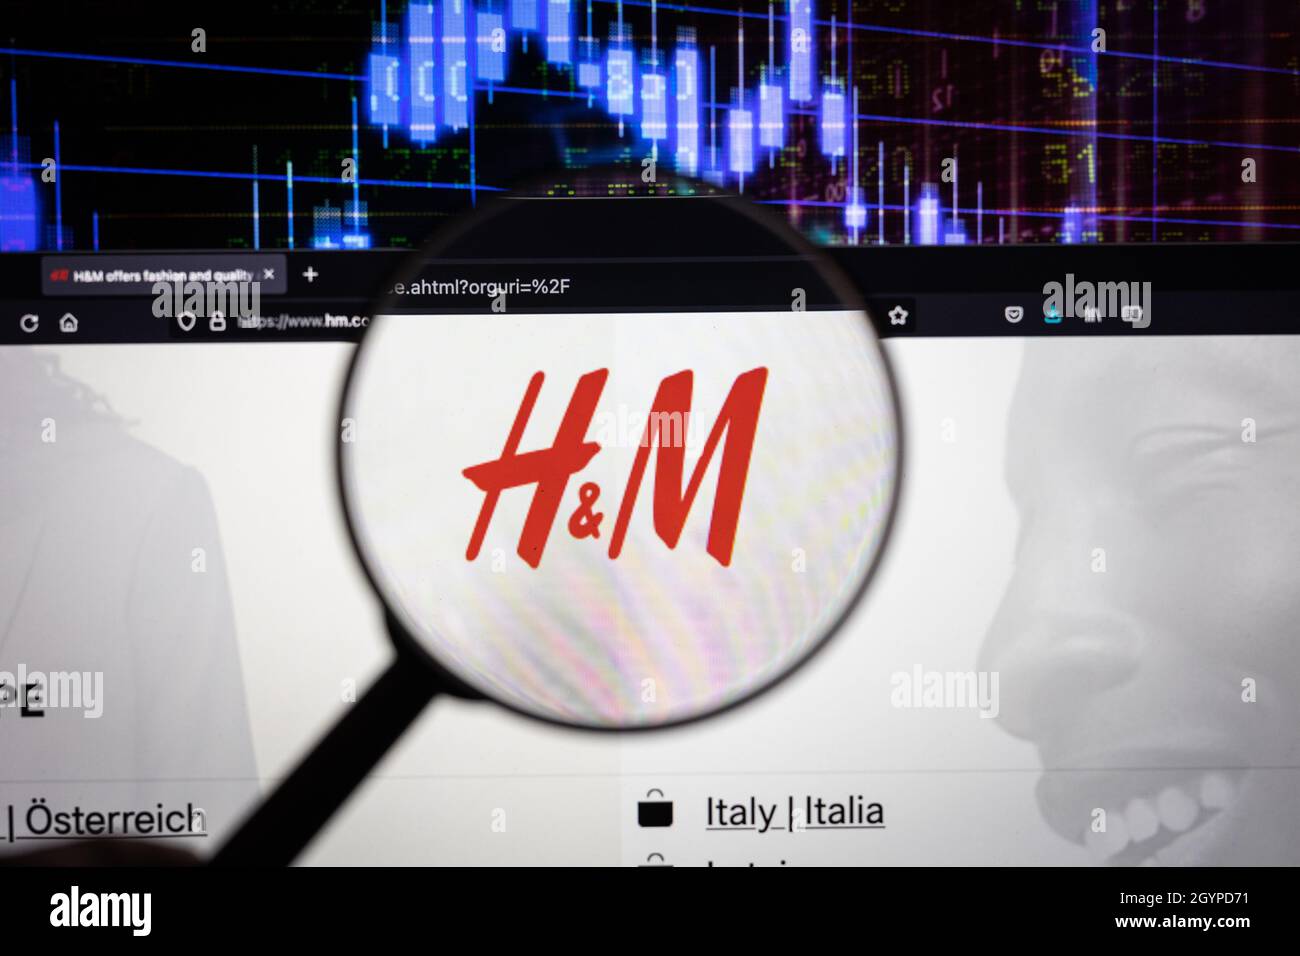 H&M company logo on a website with blurry stock market developments in the background, seen on a computer screen through a magnifying glass Stock Photo